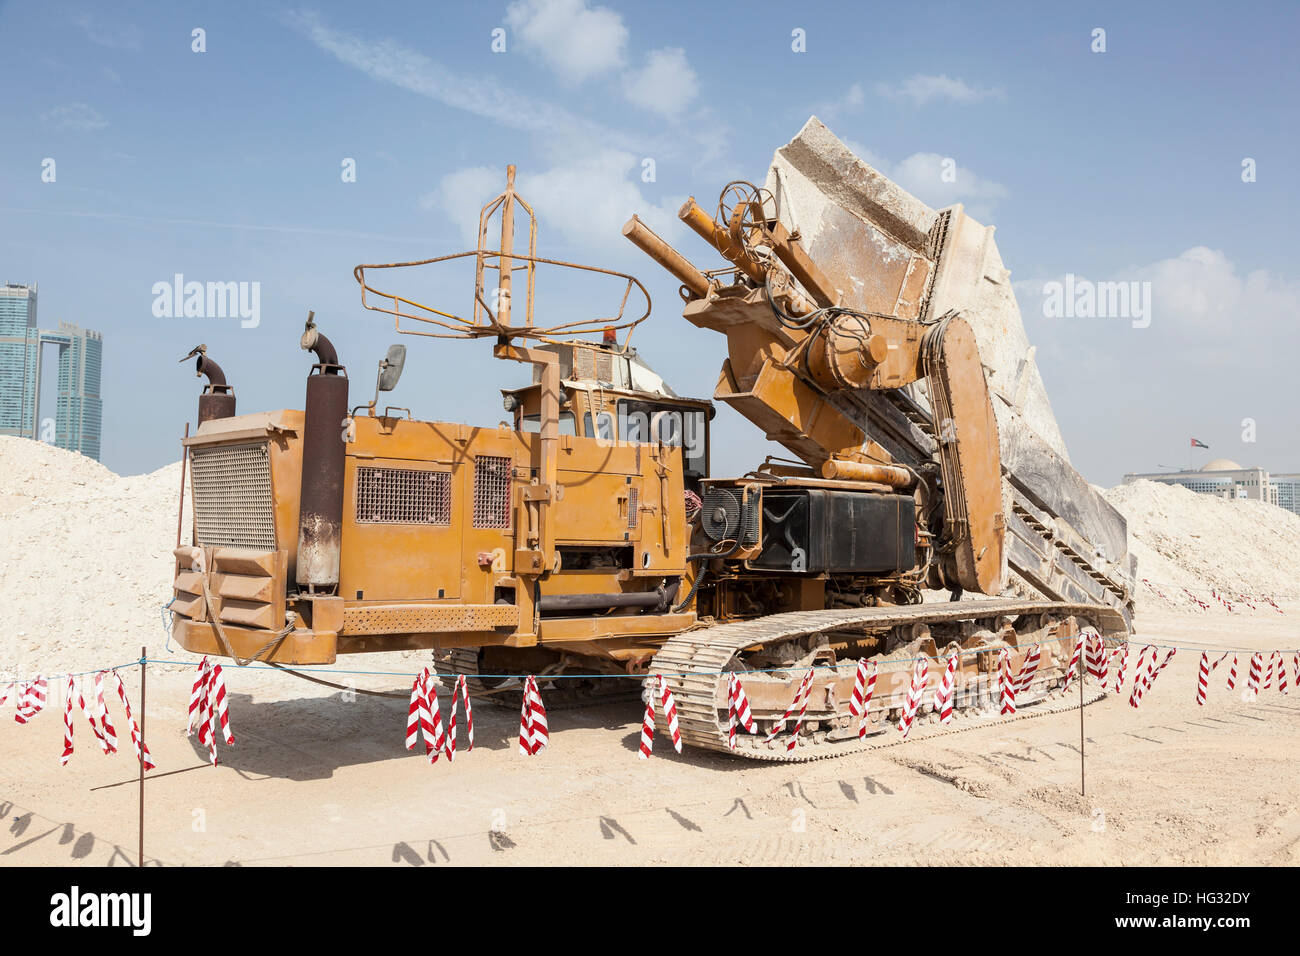 Machinery on a construction site Stock Photo